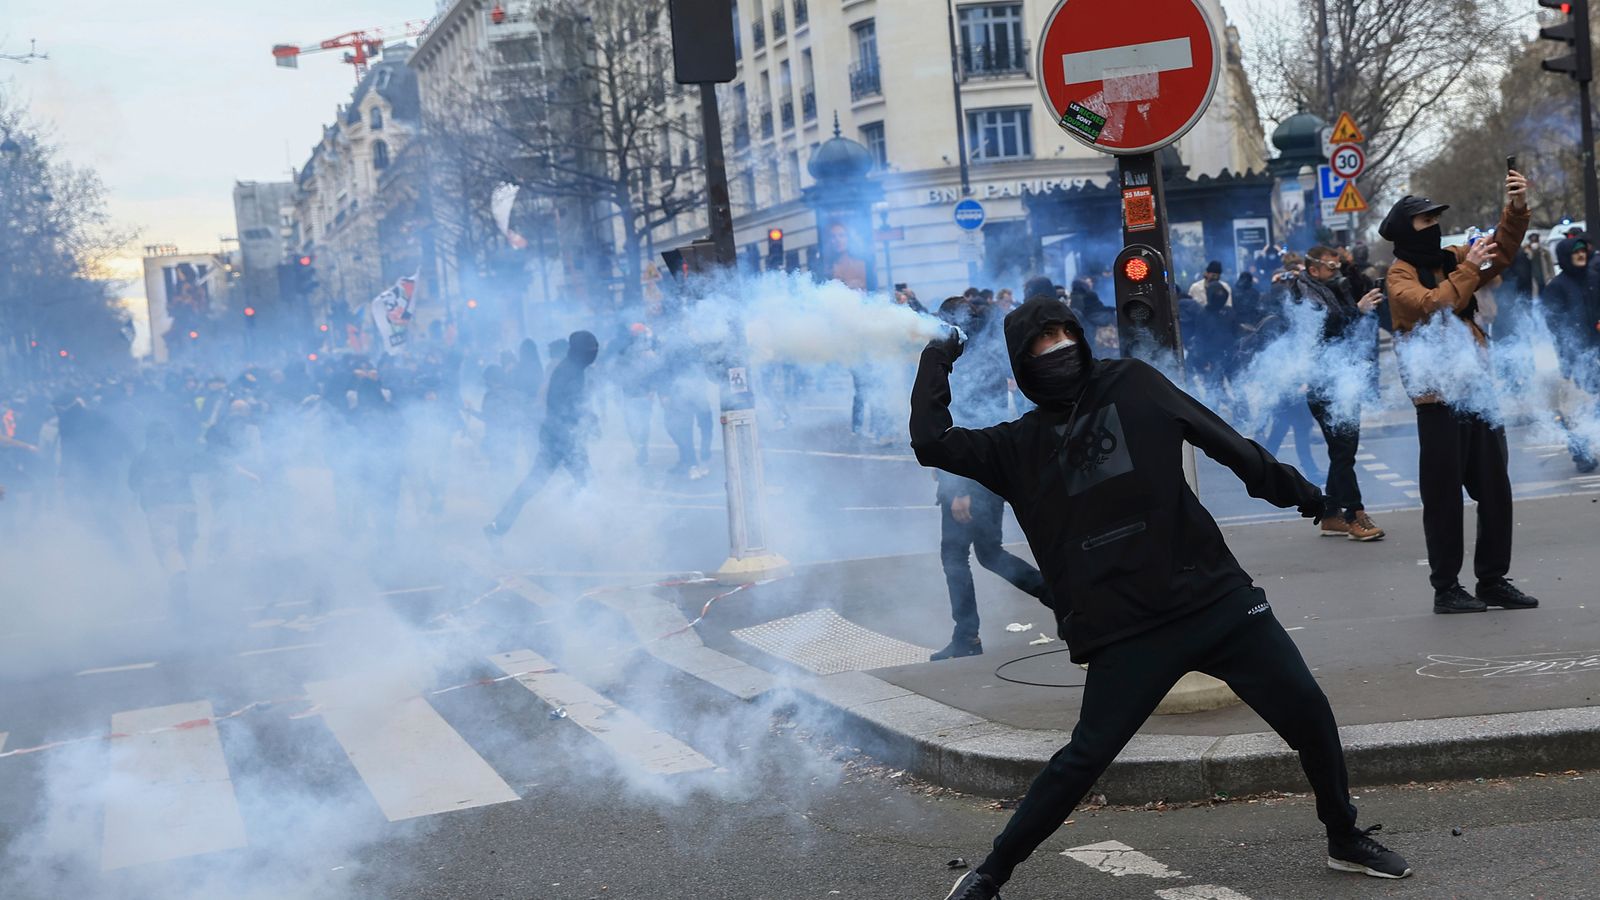 A nationwide strike in France to protest a rise in the retirement age. Ending in violent clashes